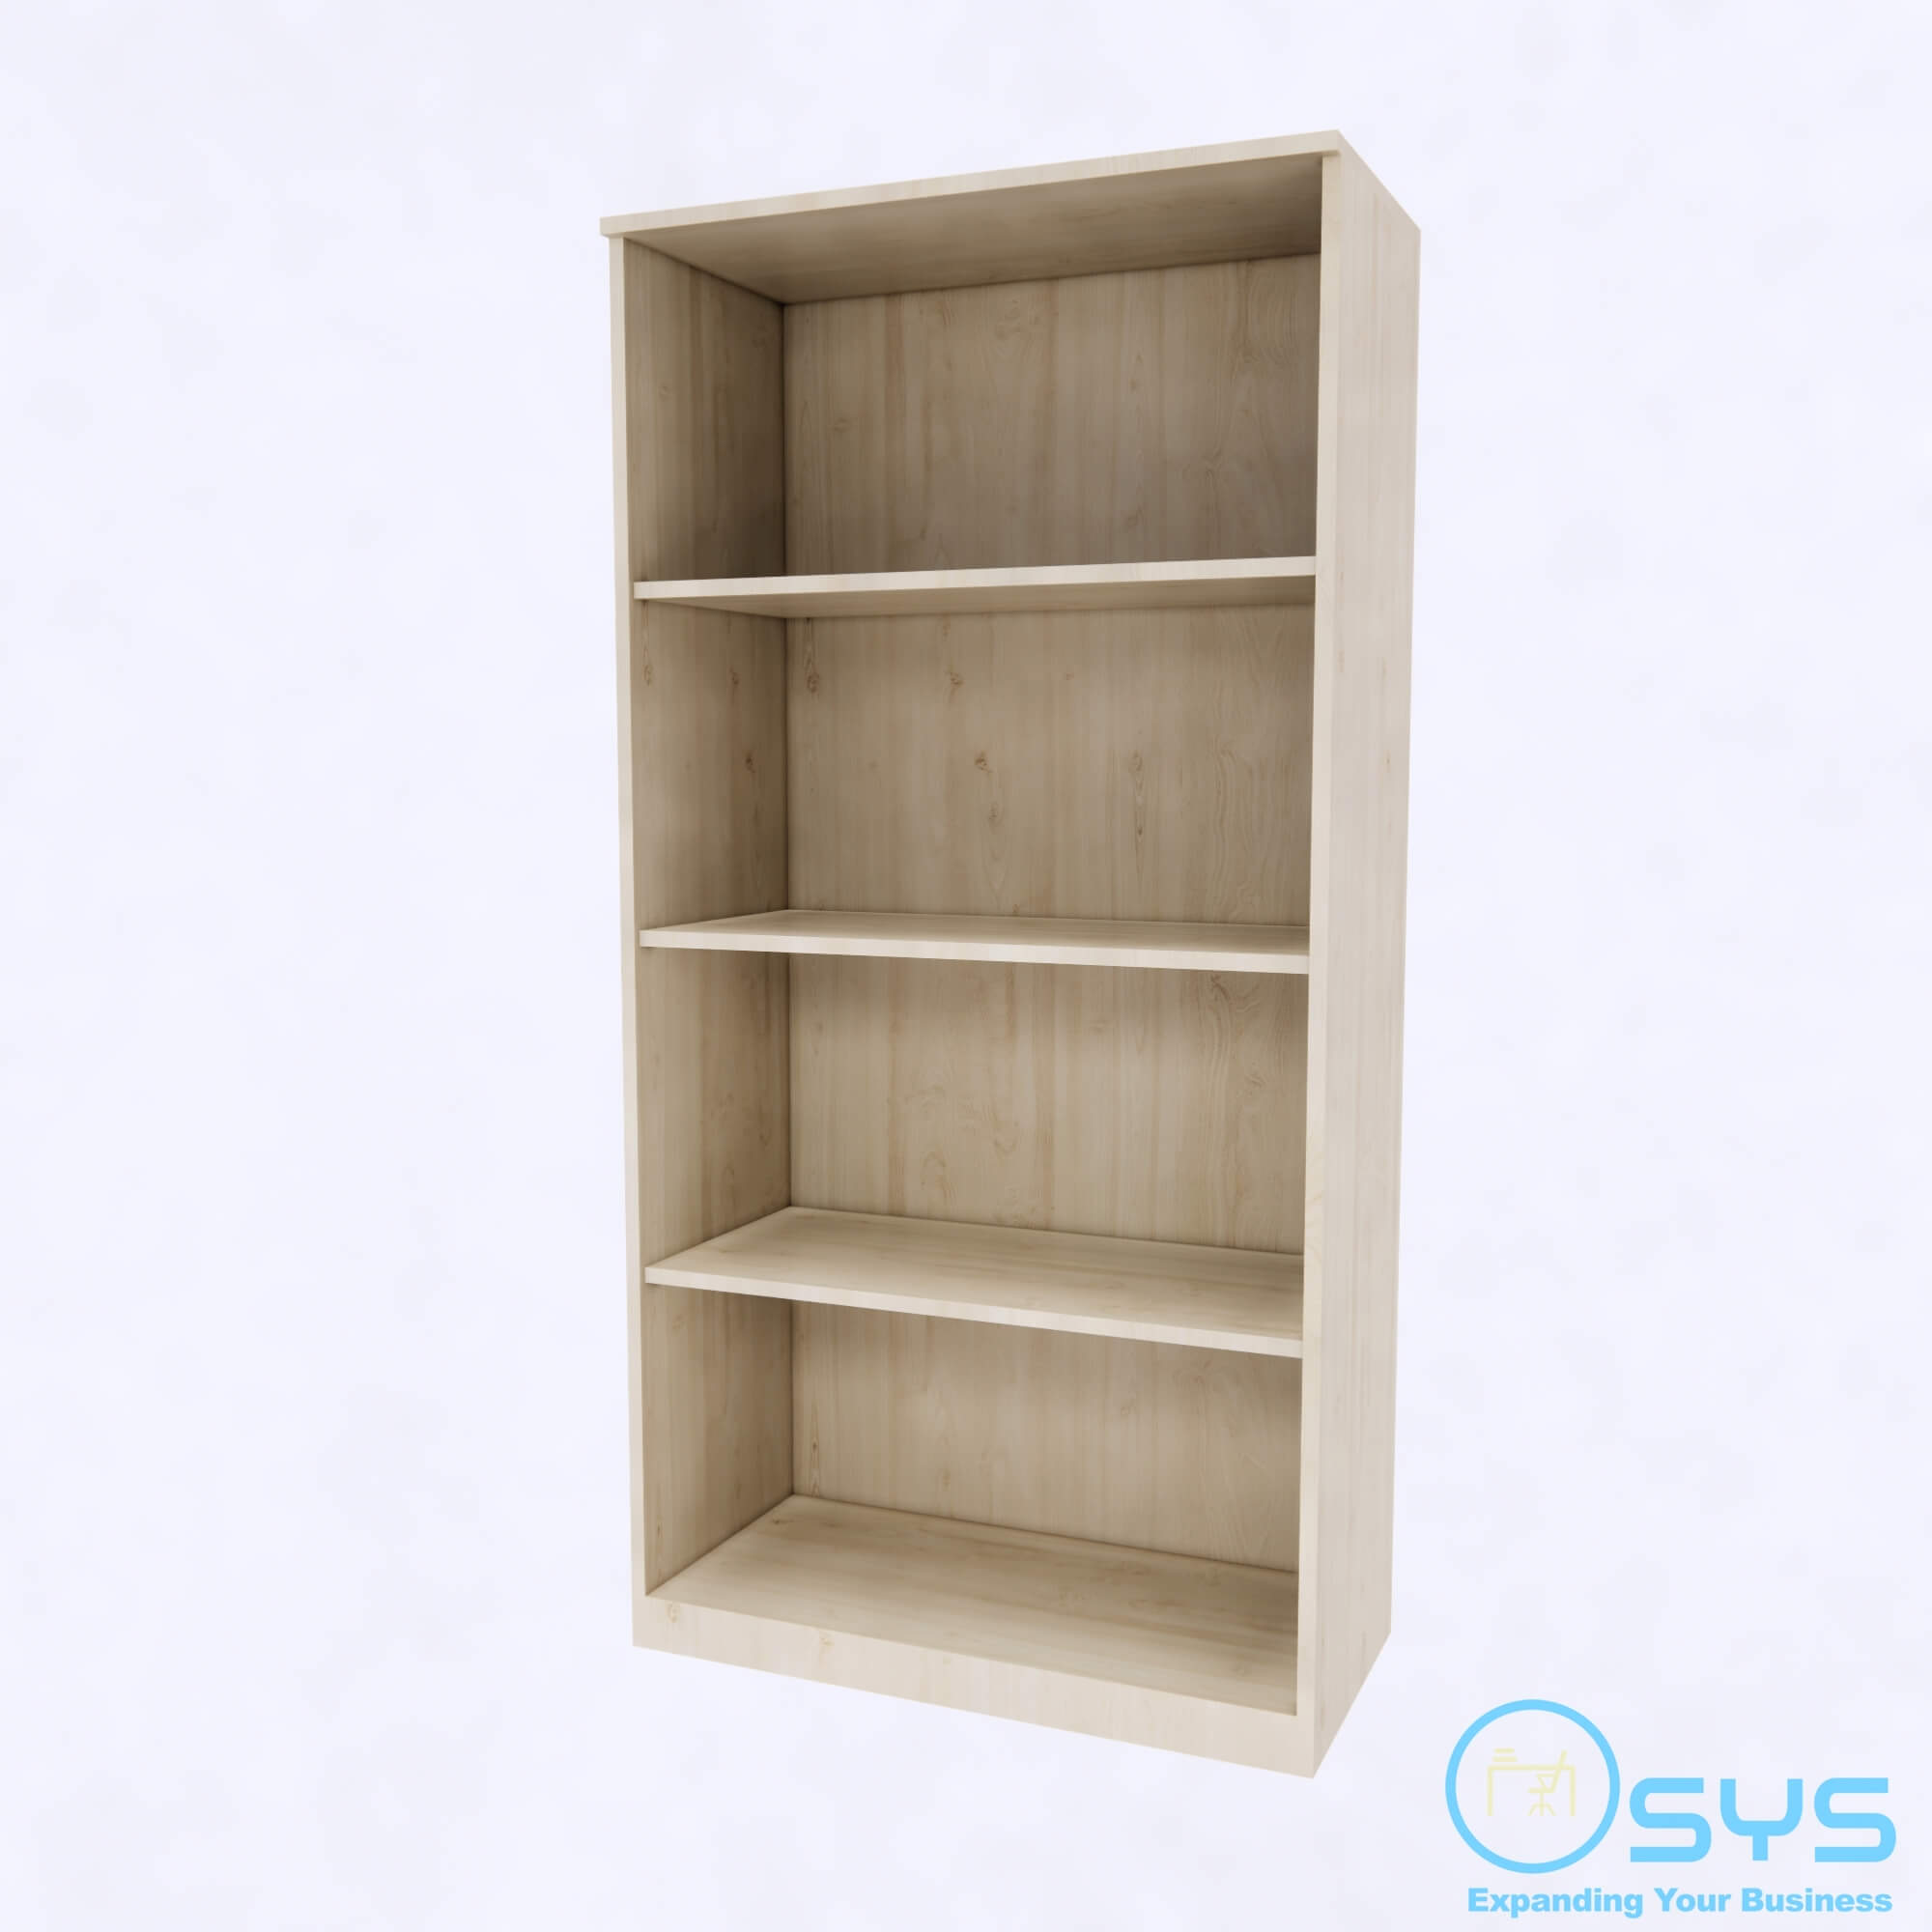 Wooden Cabinet 007-2